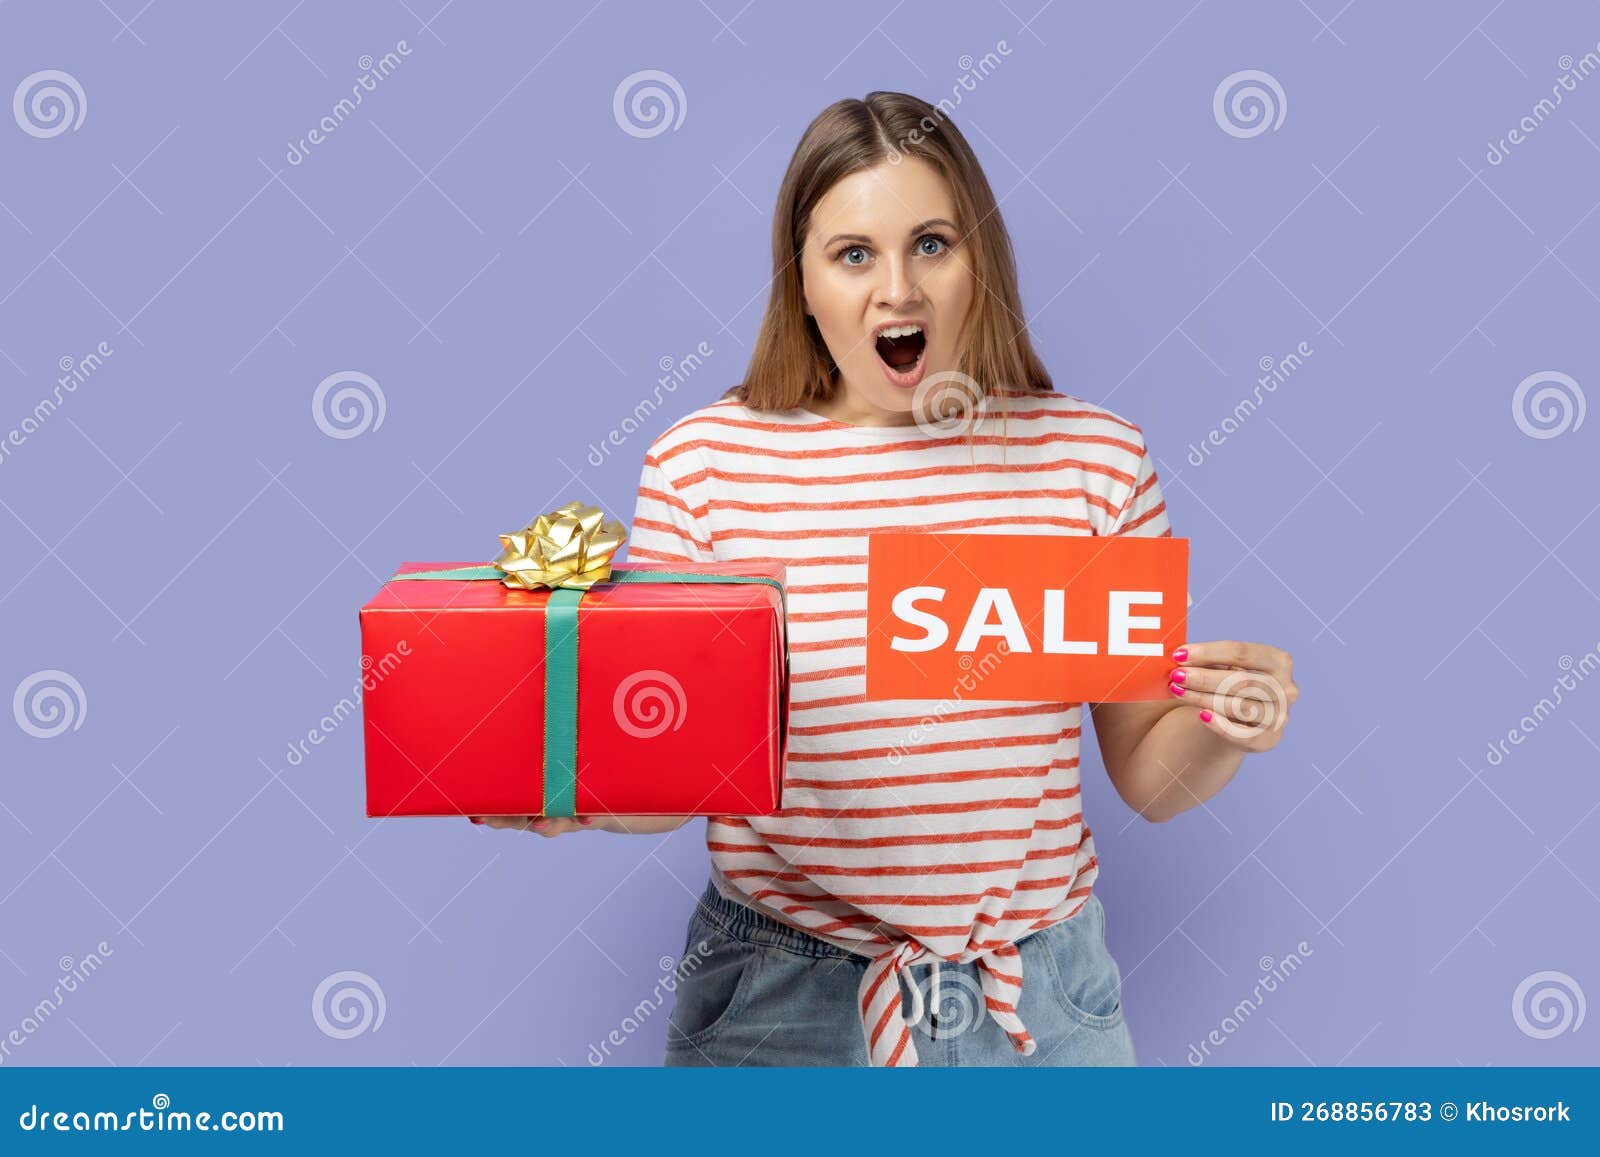 amazed shocked woman standing with sale card and red gift box in hands, big bonus for holiday.